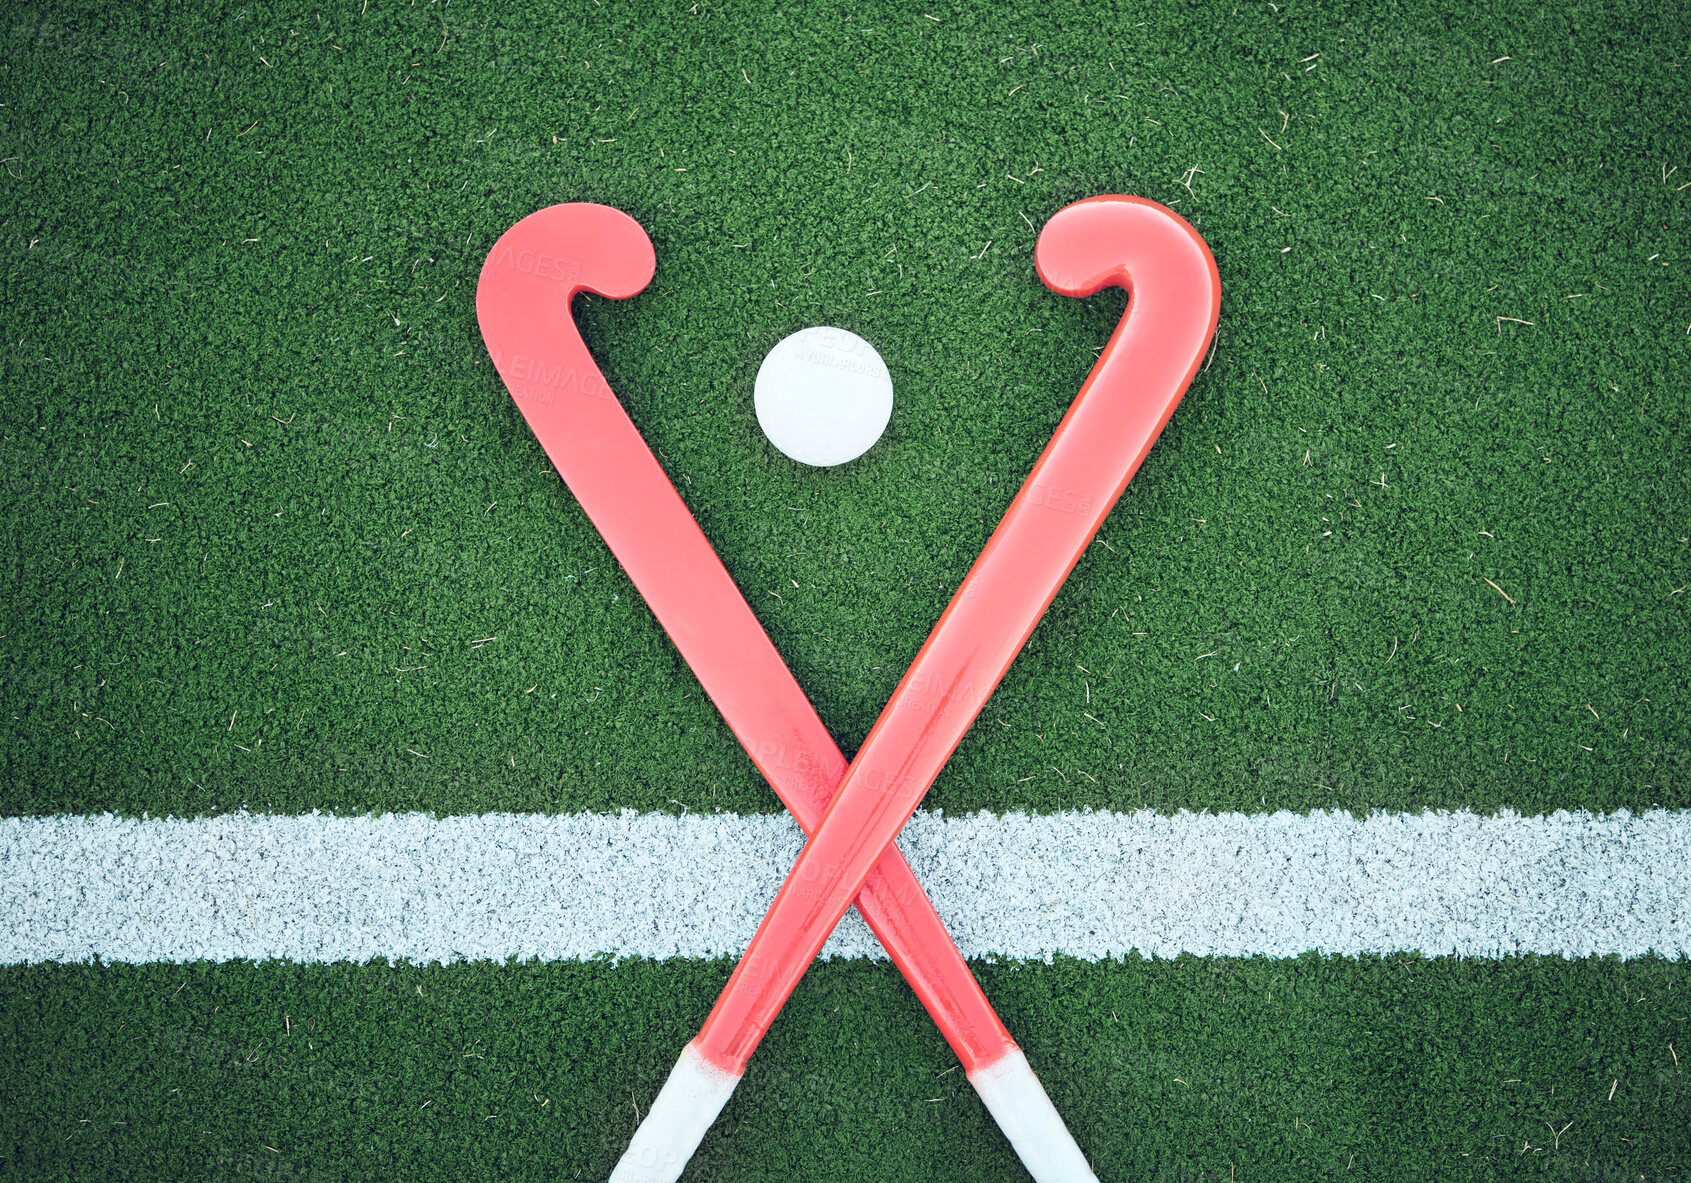 Buy stock photo Turf field, hockey stick or sports ball on the ground for fitness competition, exercise contest or practice match. Green pitch, astroturf or cross of game equipment on the floor for training top view